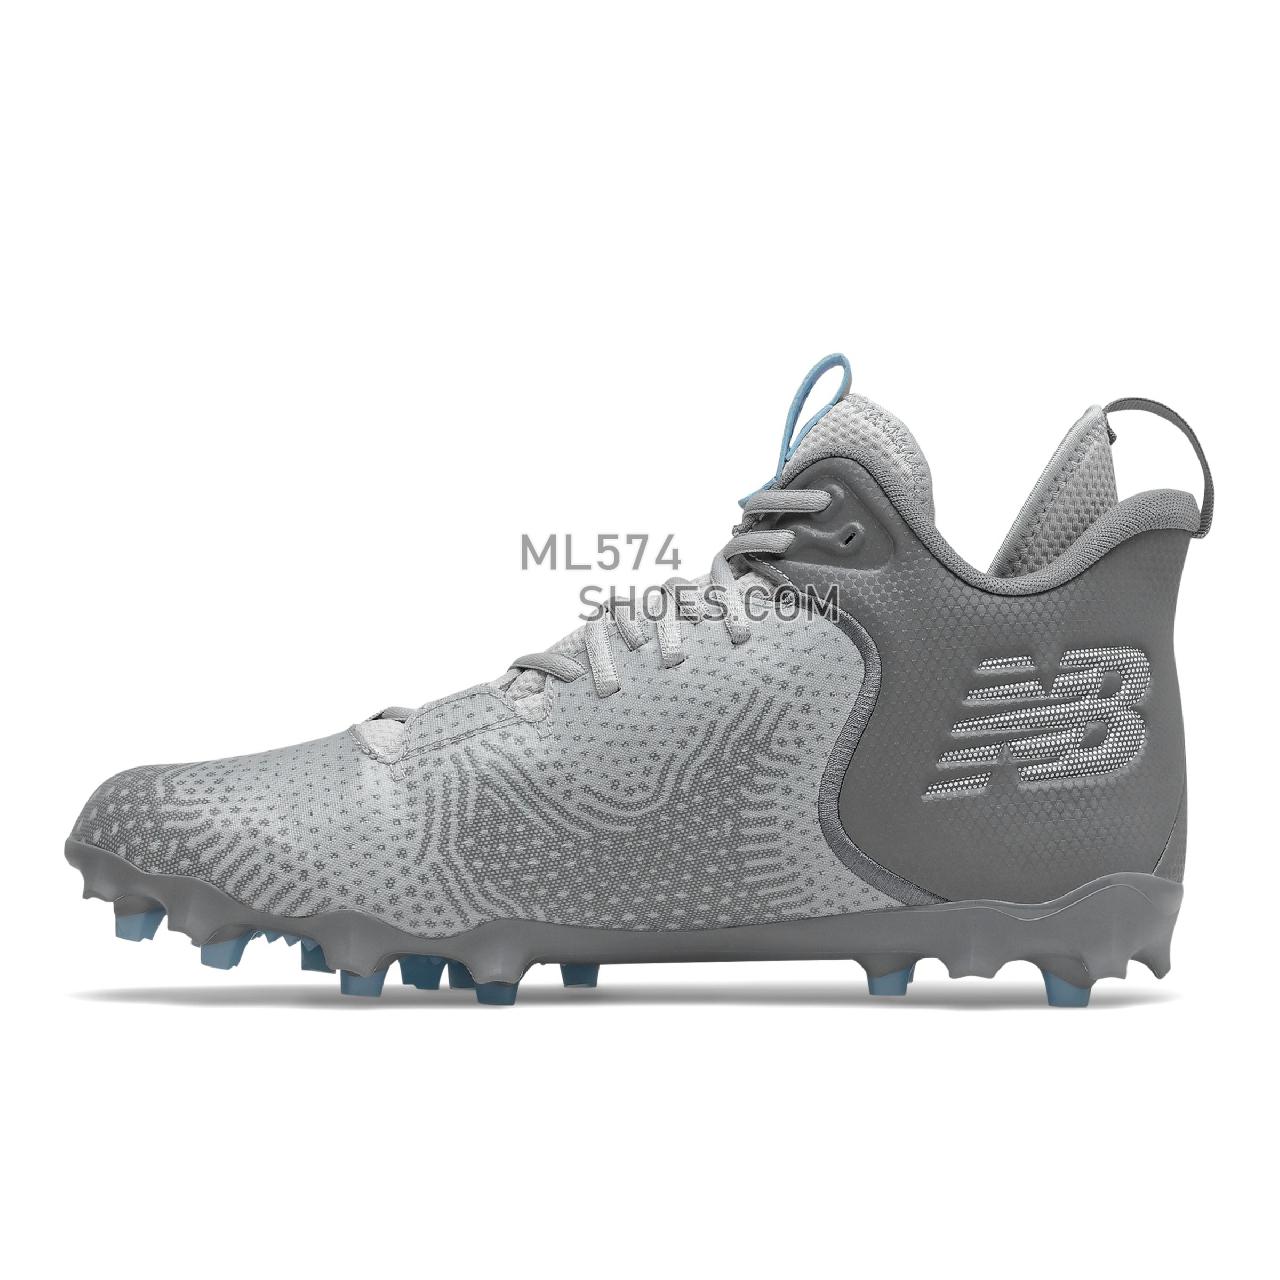 New Balance FreezeLX v3 - Men's Turf And Lacrosse Cleats - Grey with White - FREEZG3